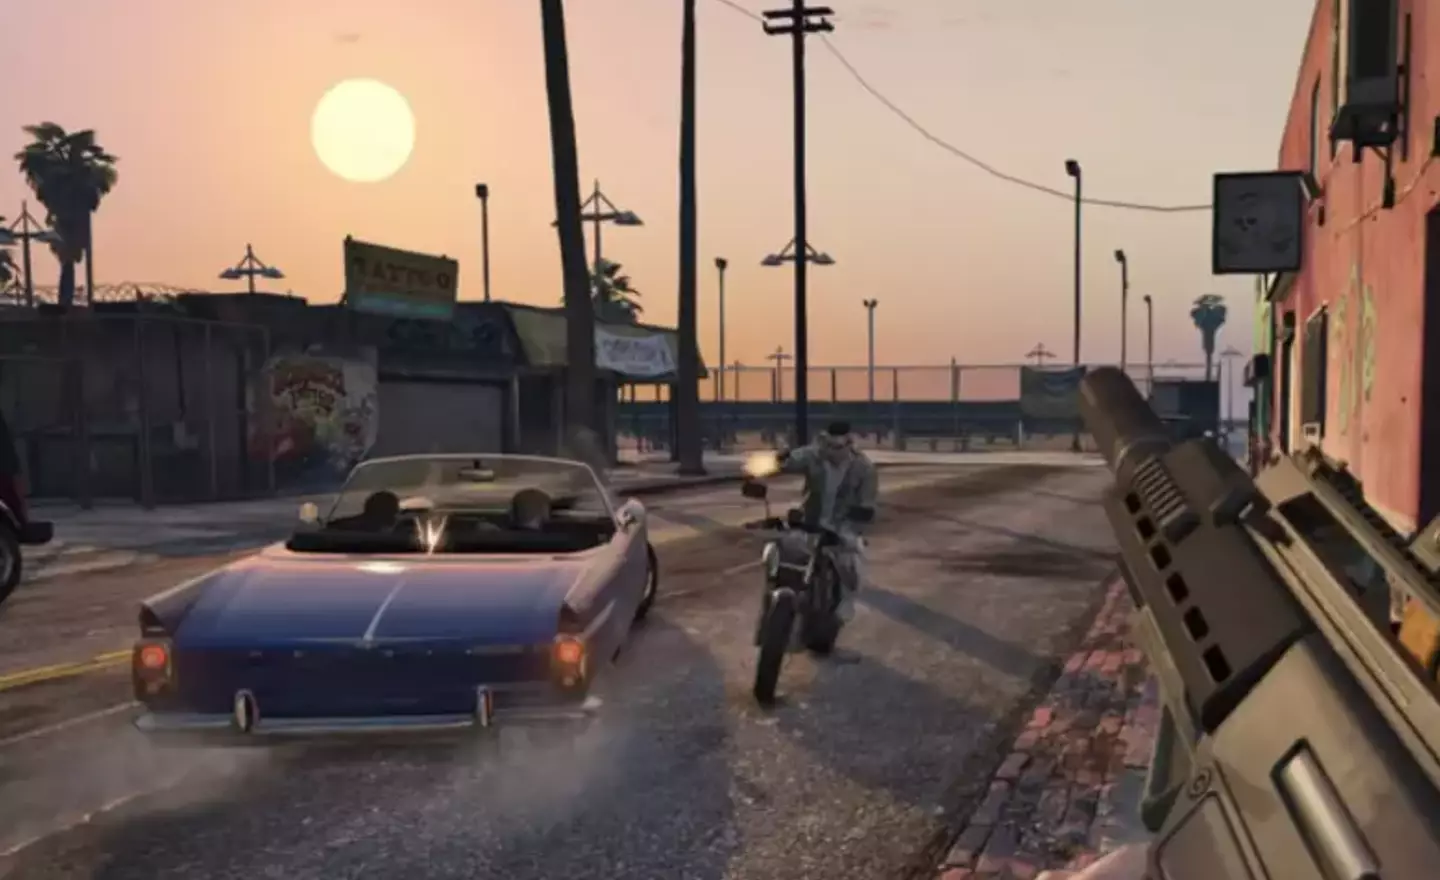 GTA 6 is set to be the most expensive game of all time.